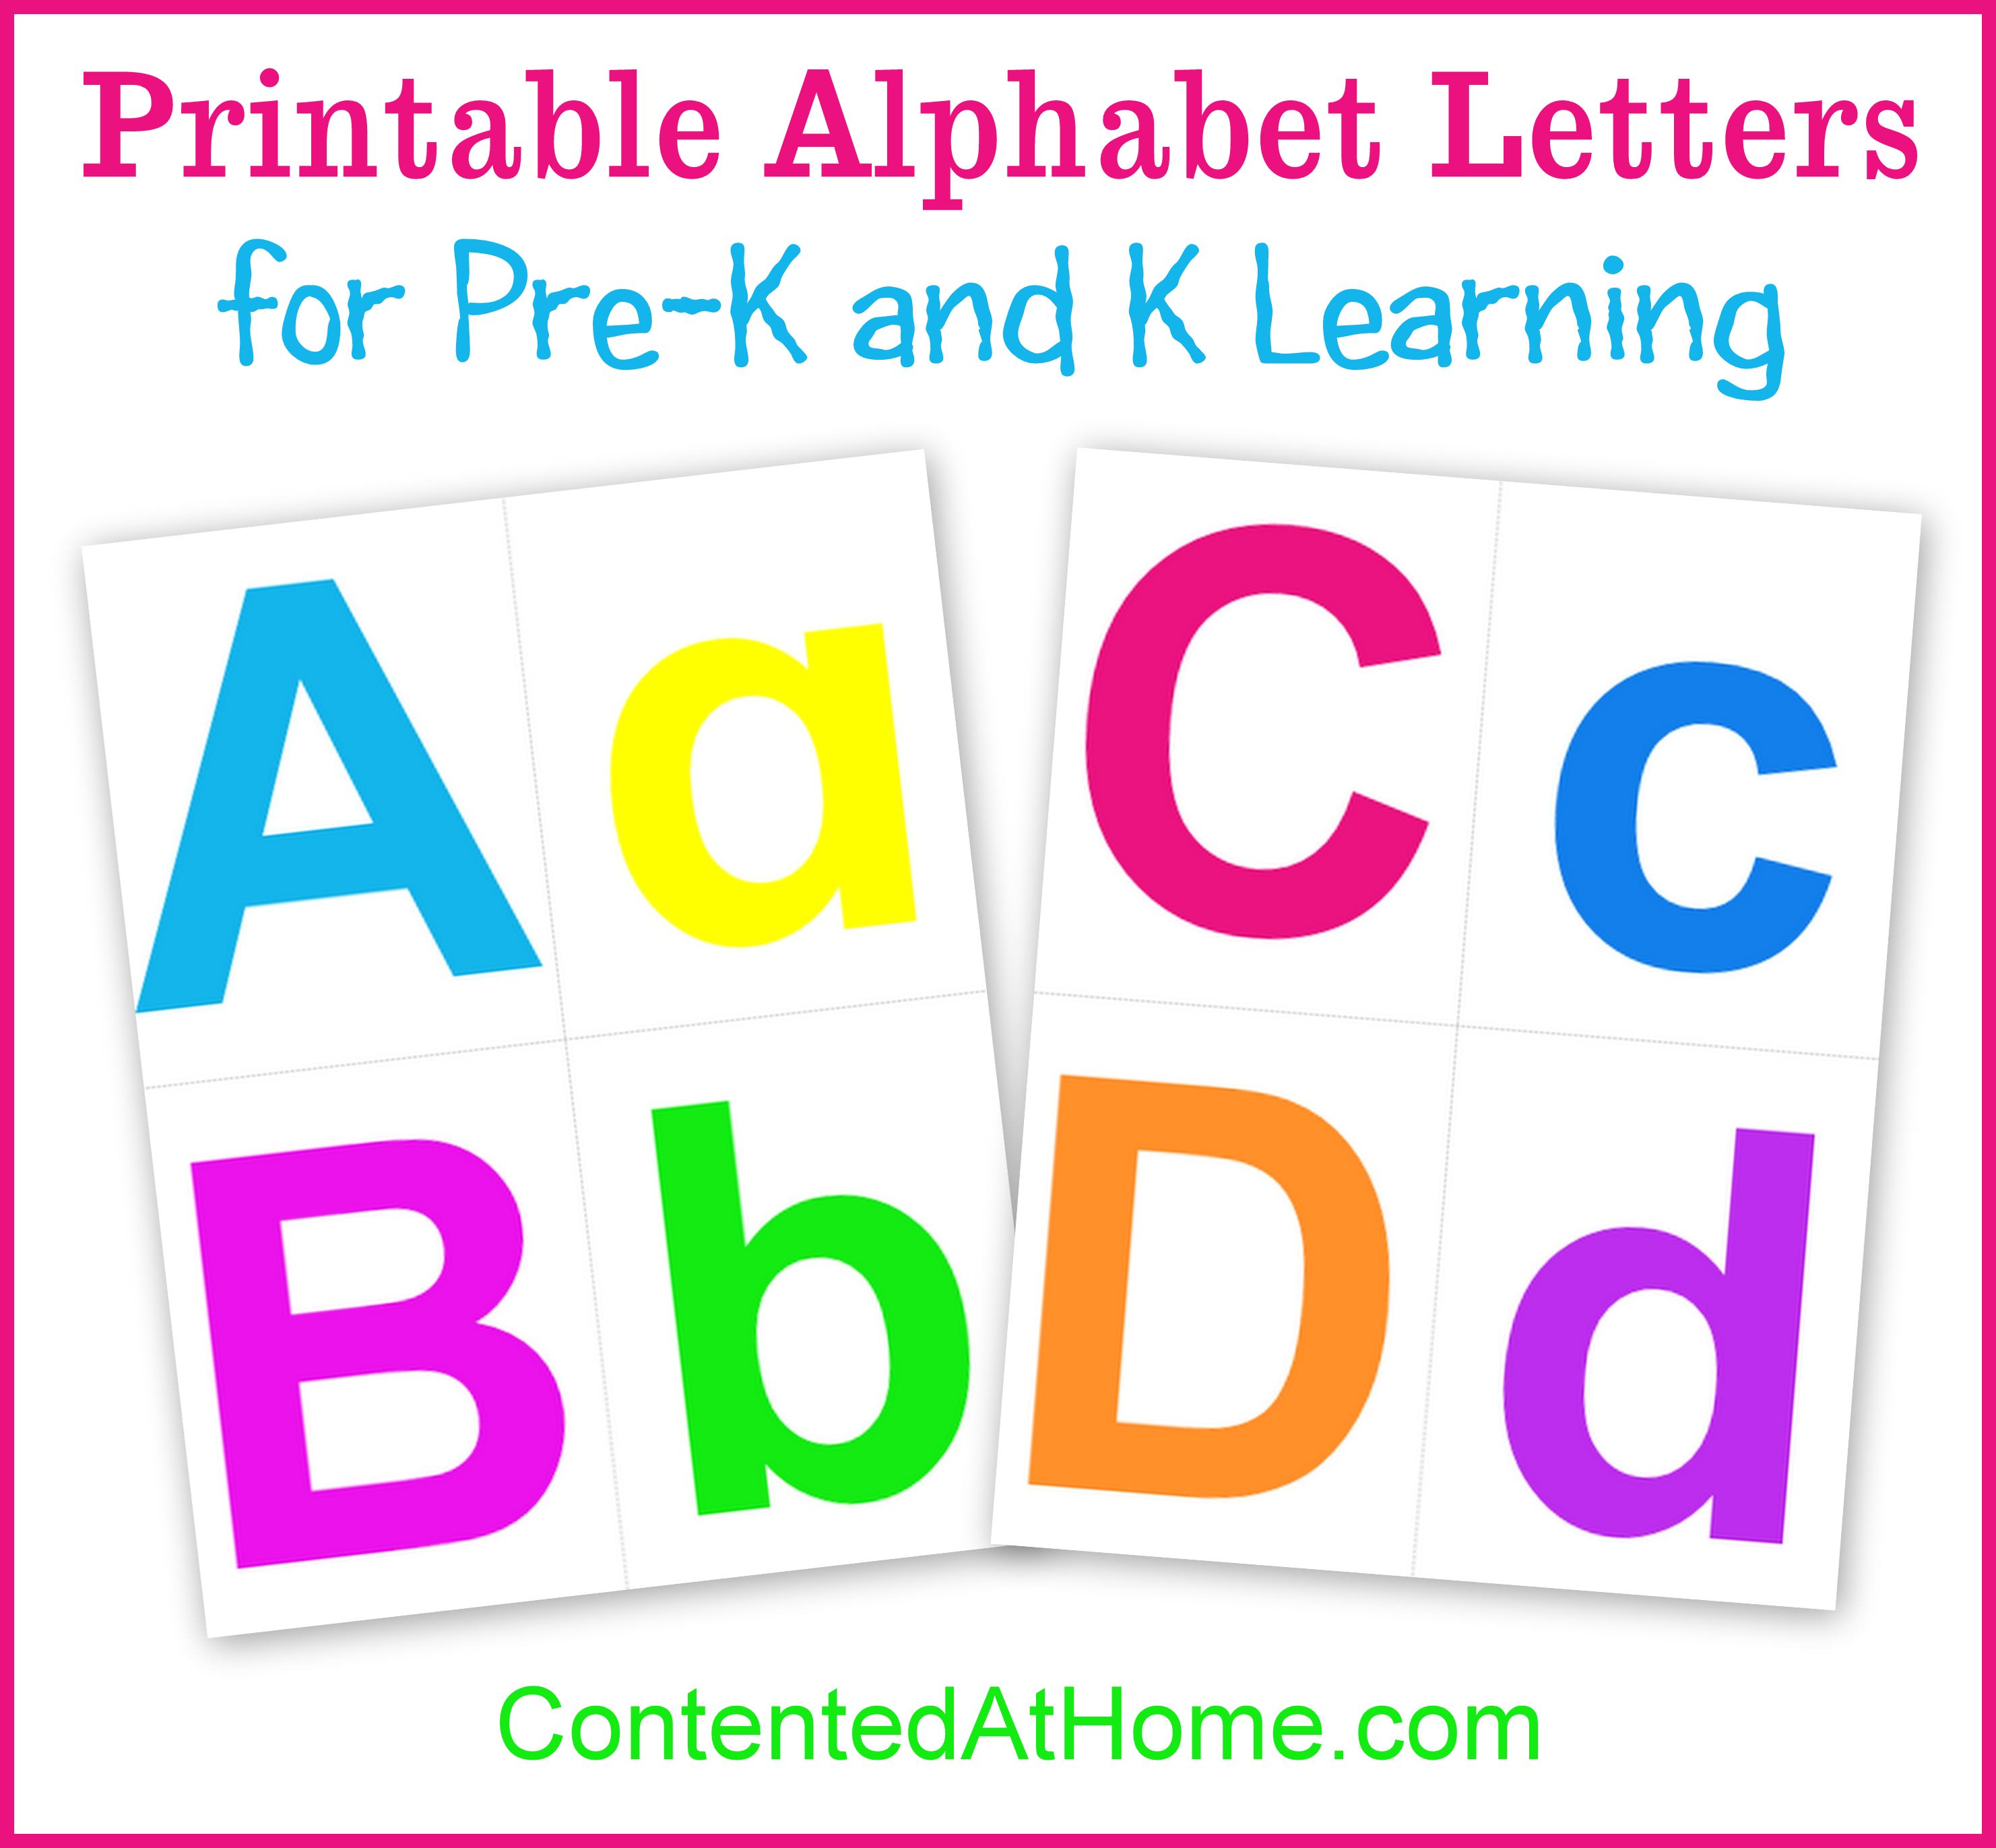 Printable Alphabet Letters | Contented at Home